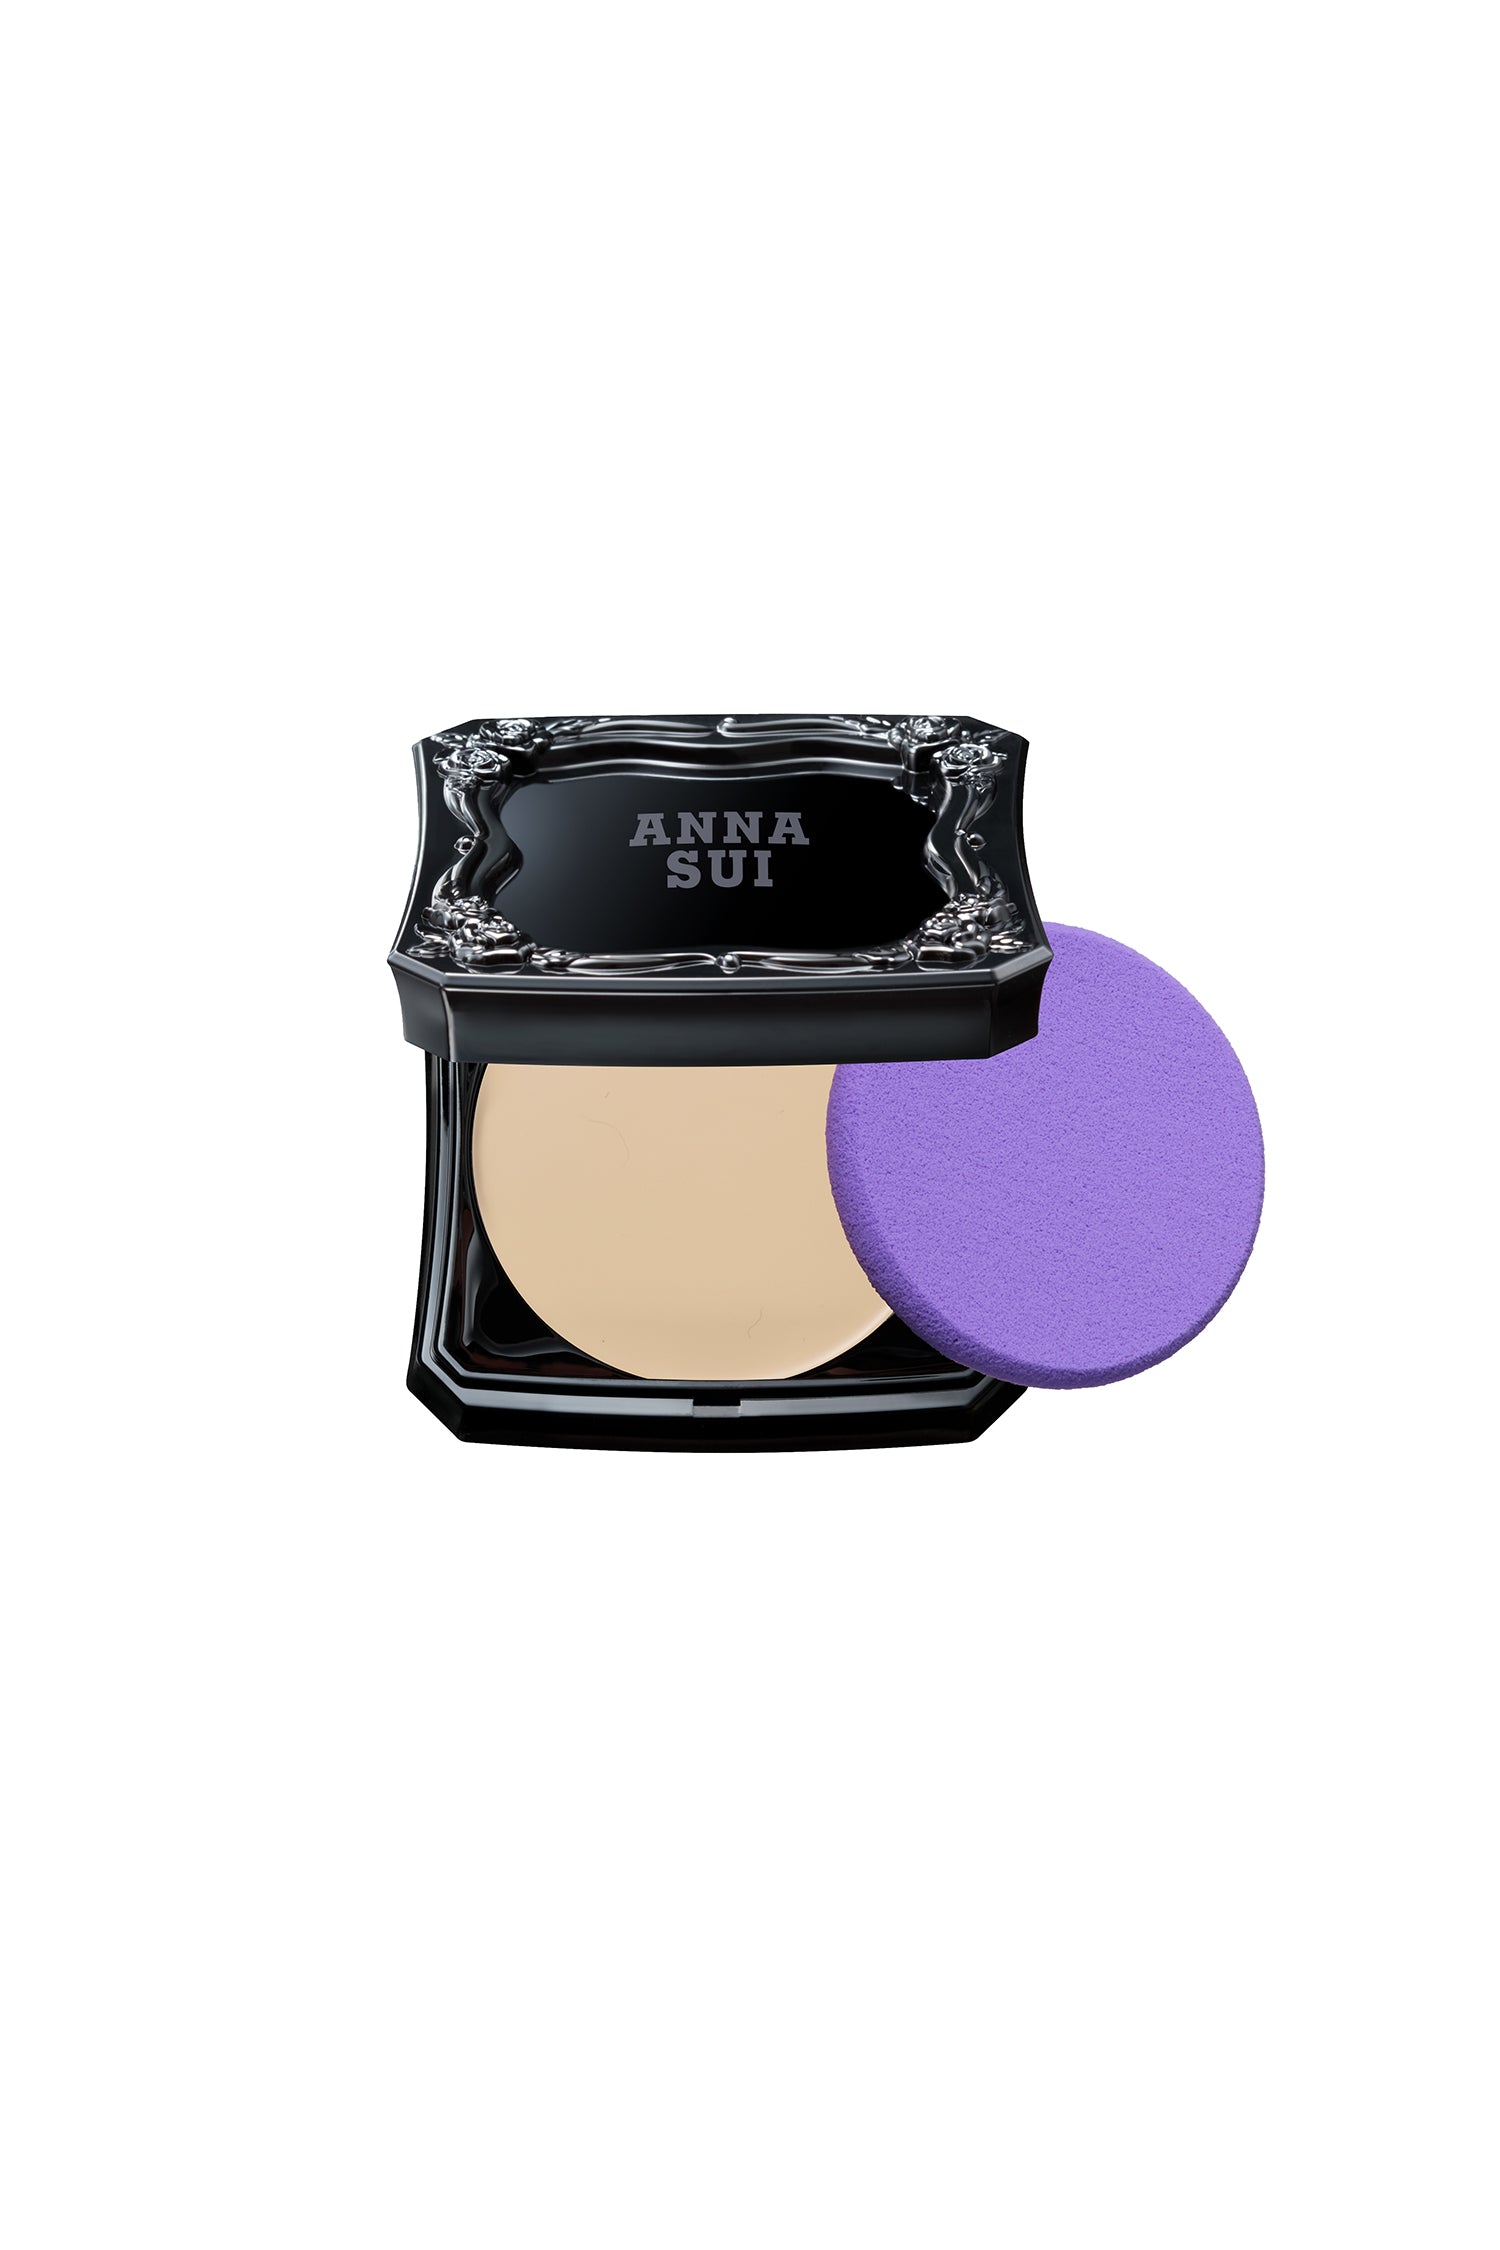 Anna Sui FAIR foundation in a black container with raised rose pattern and label, creates a flawless doll-like look